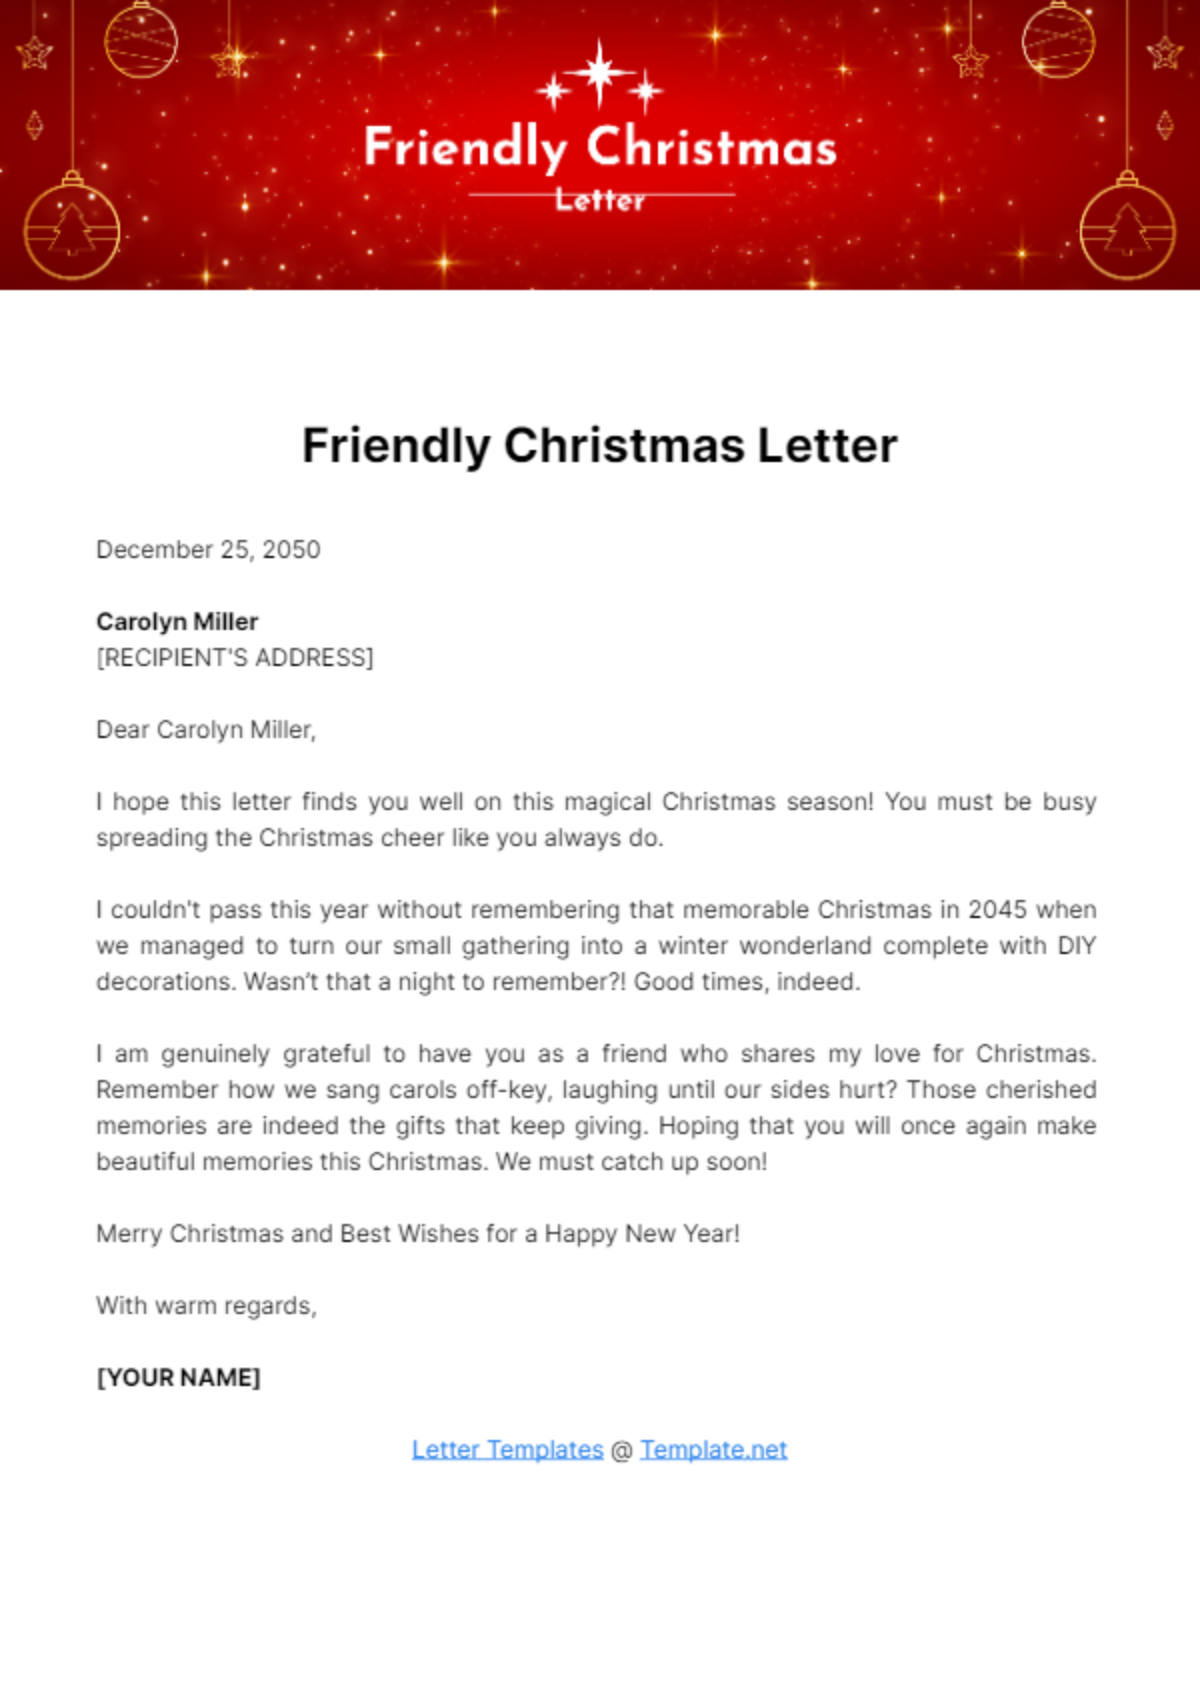 Friendly Christmas Letter Template